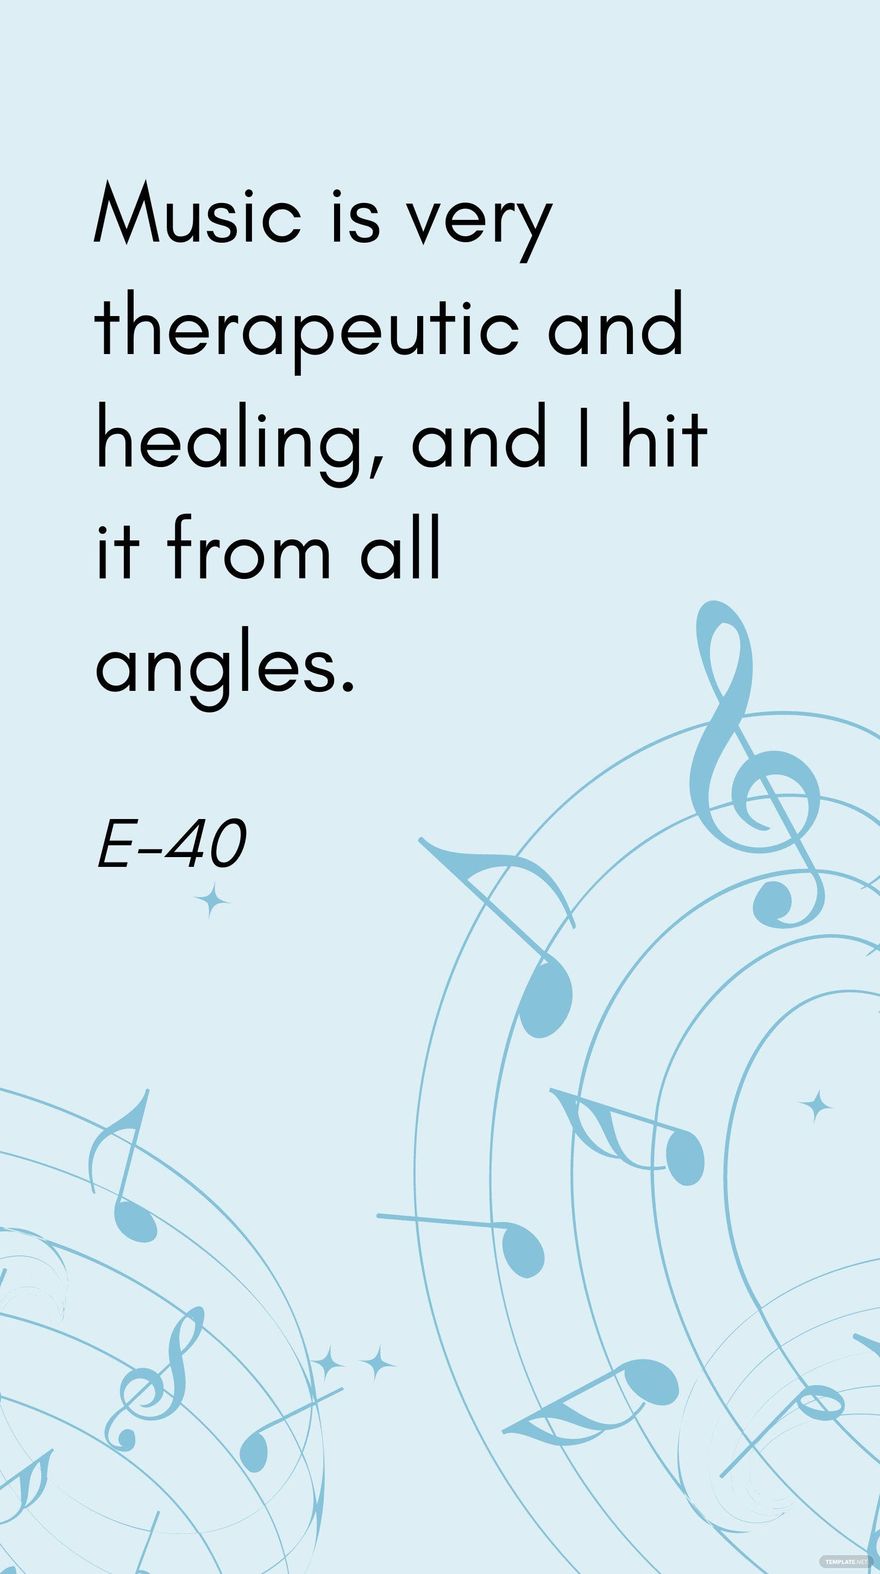 E-40 - Music is very therapeutic and healing, and I hit it from all angles.